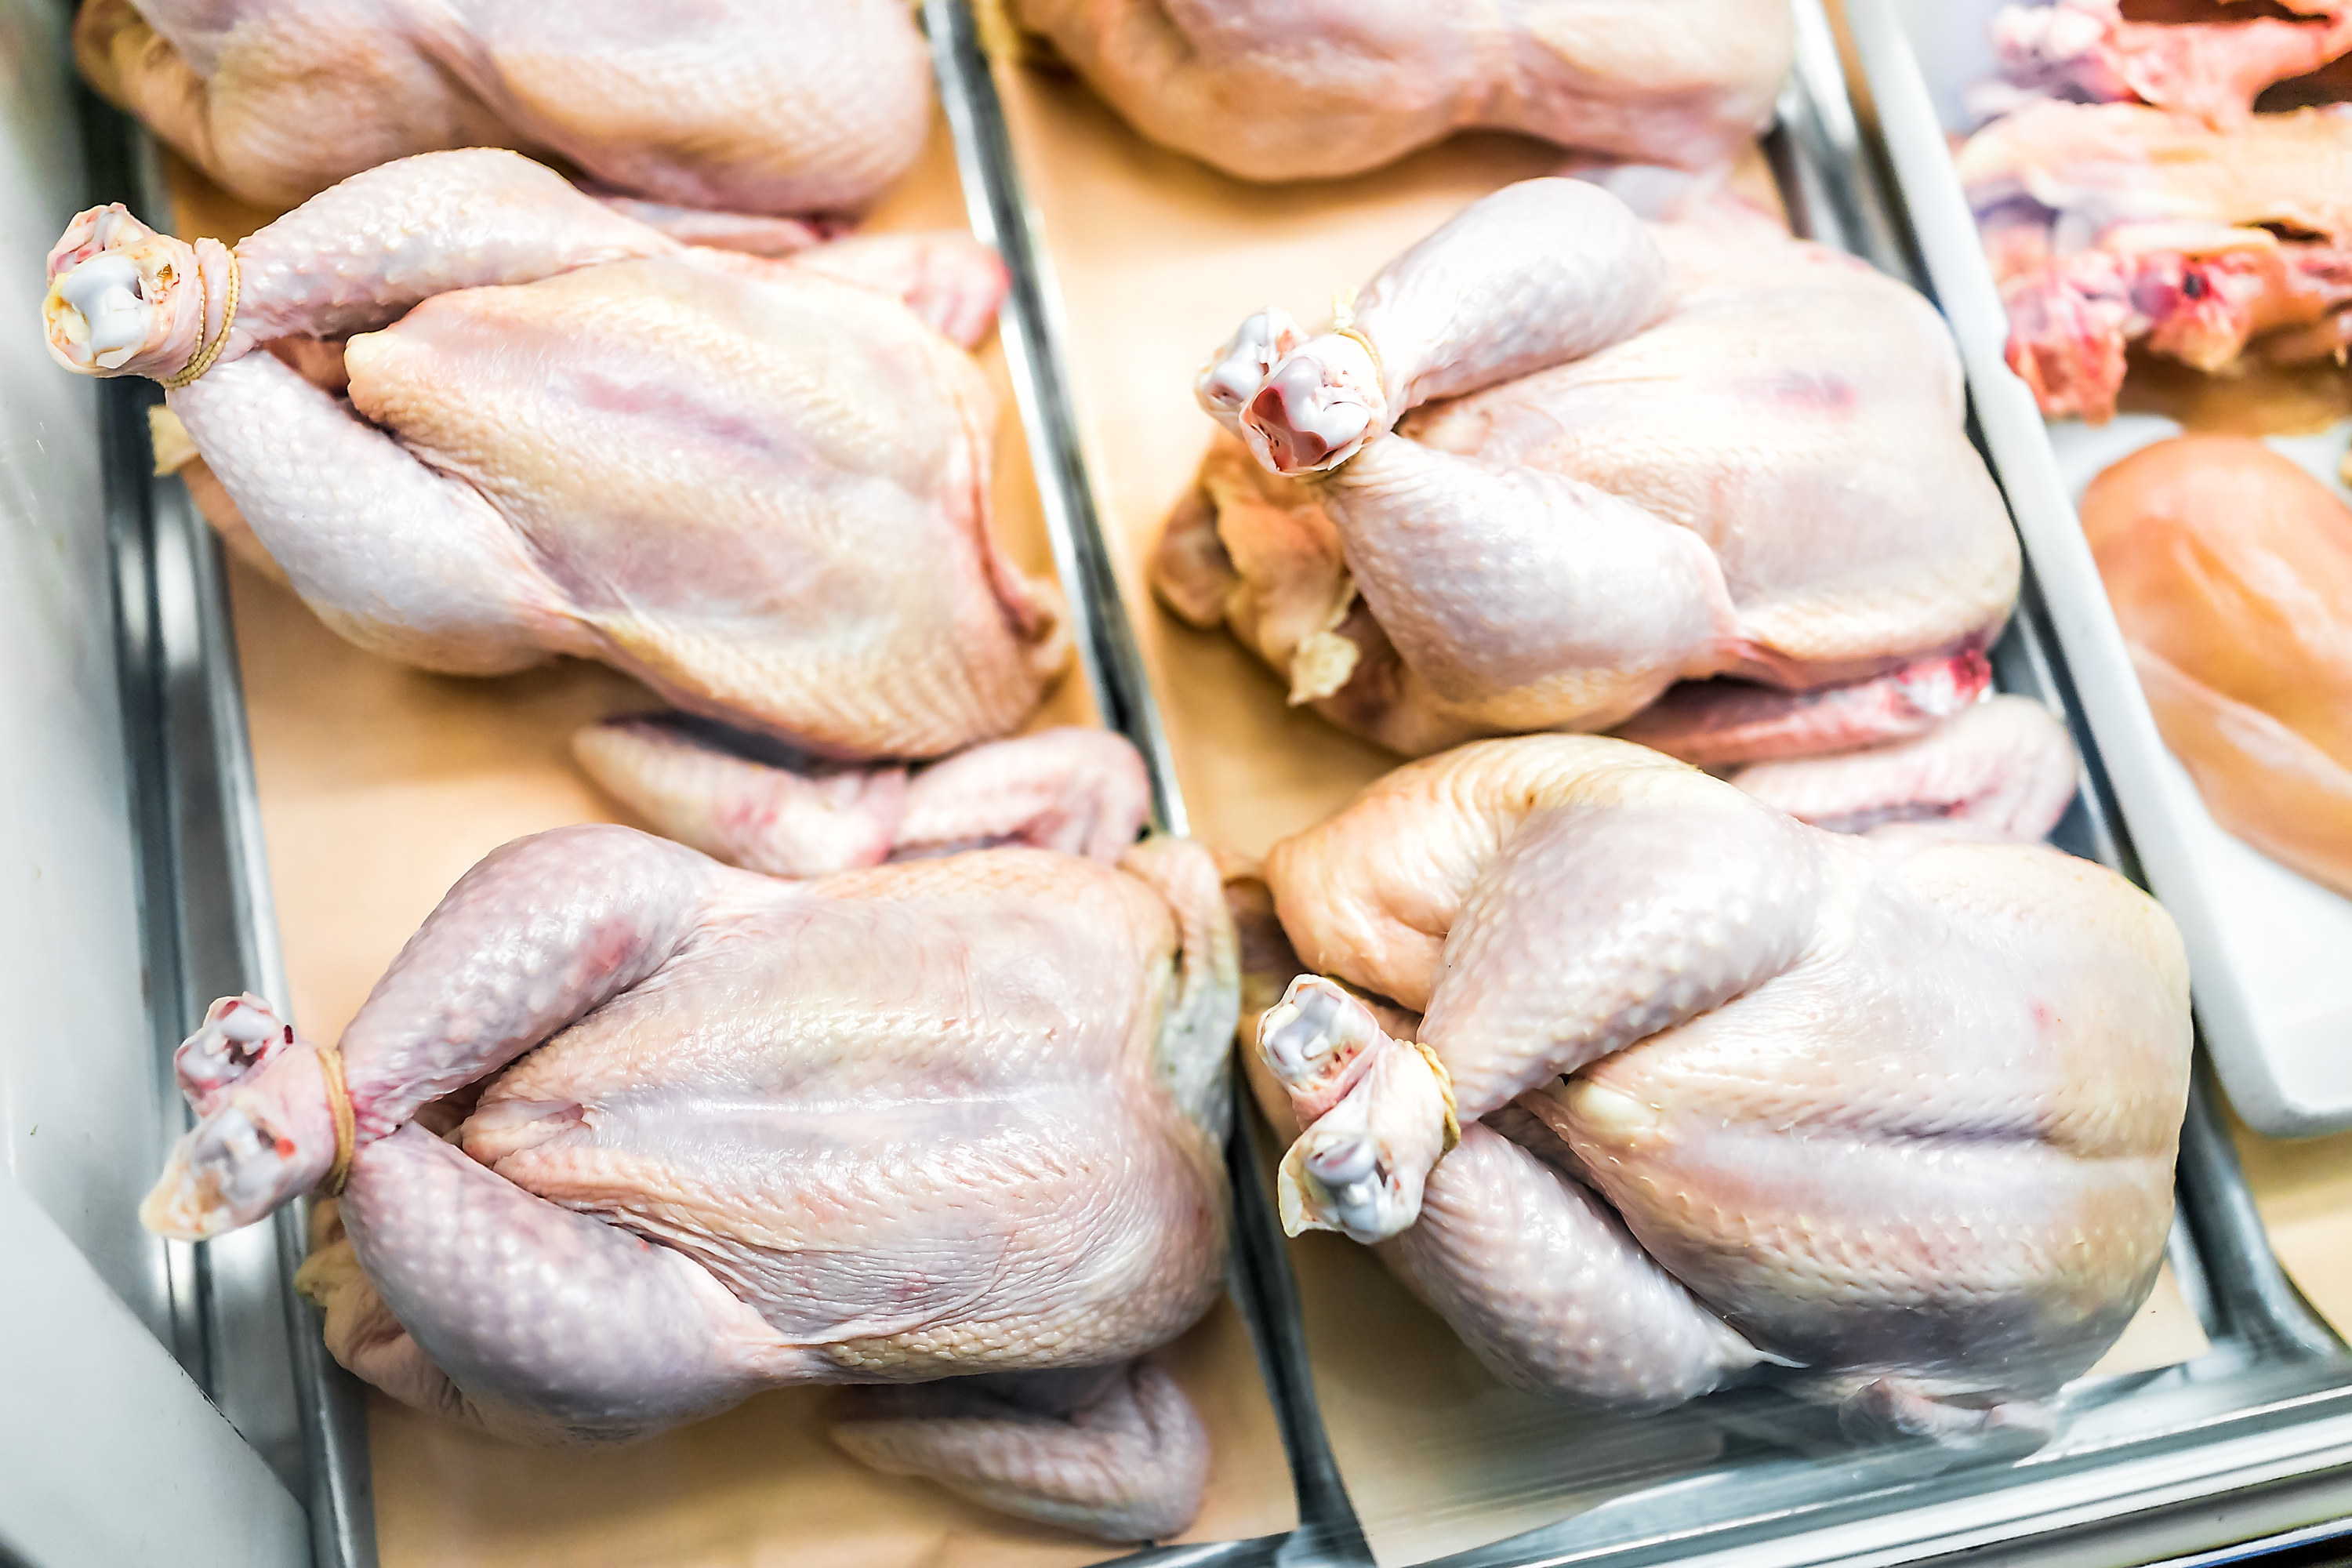 Raw, whole chickens tied with string in butcher shop grocery store